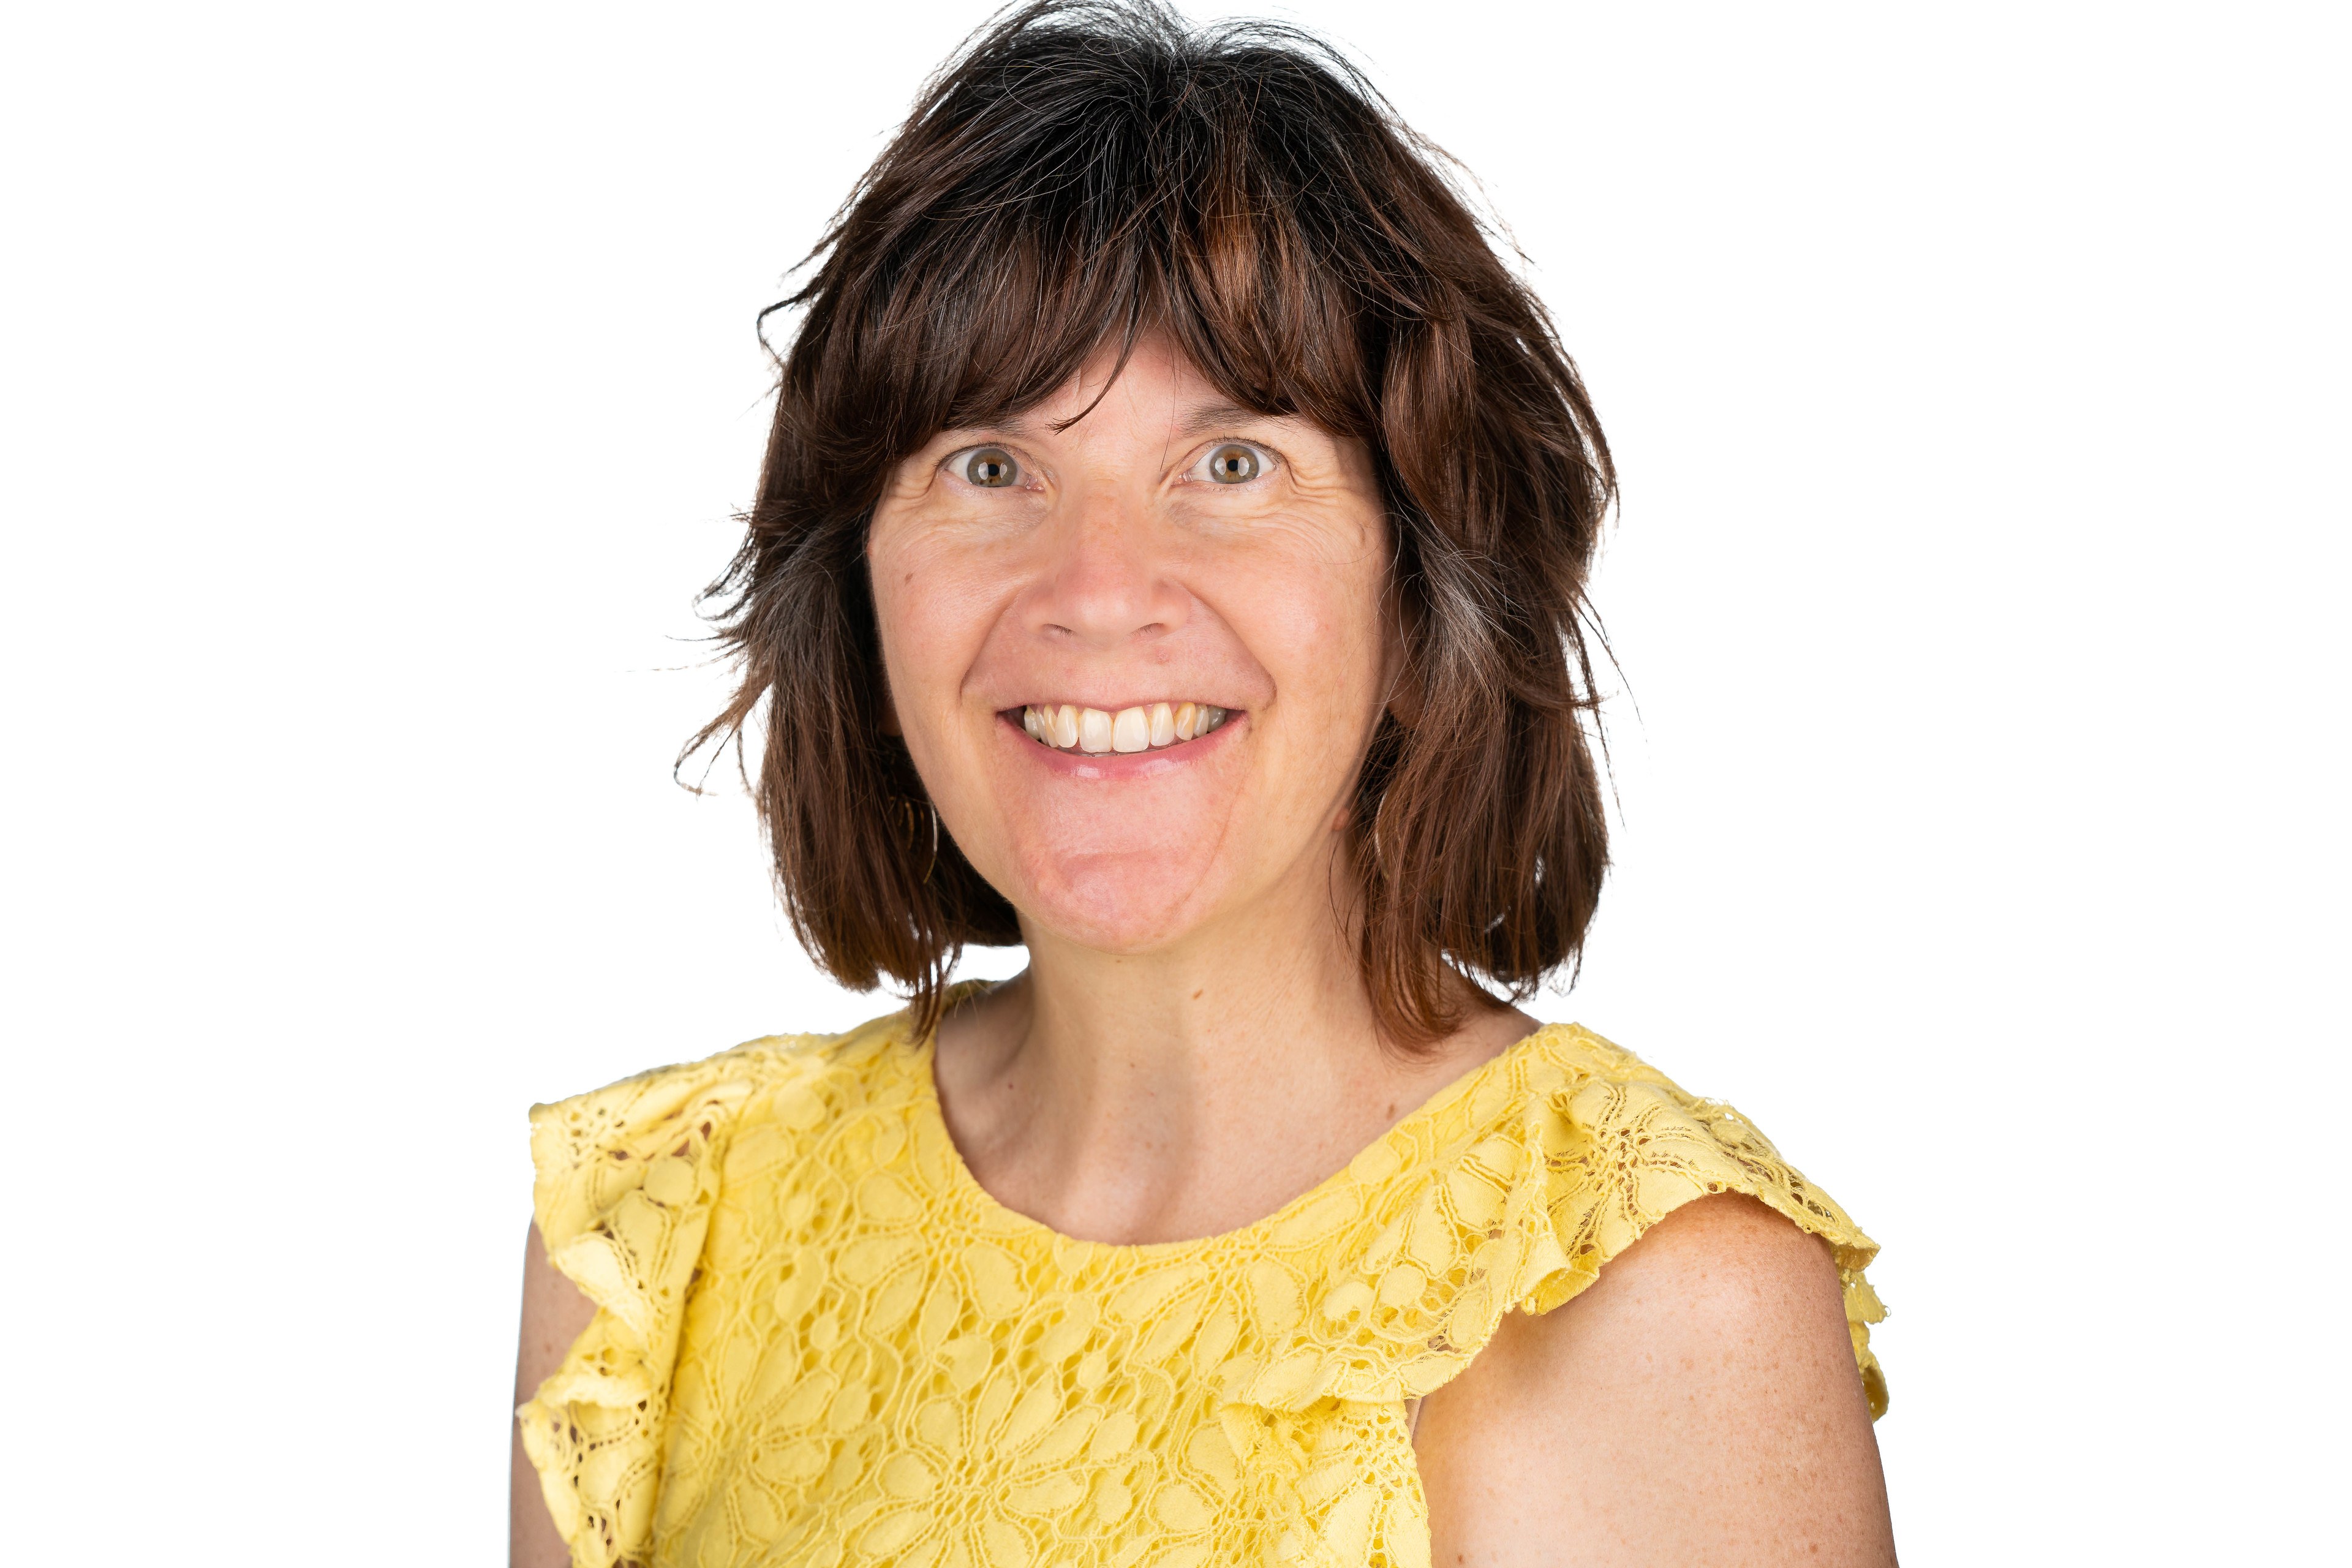 Professional headshot of Amy Lanning wearing a yellow top